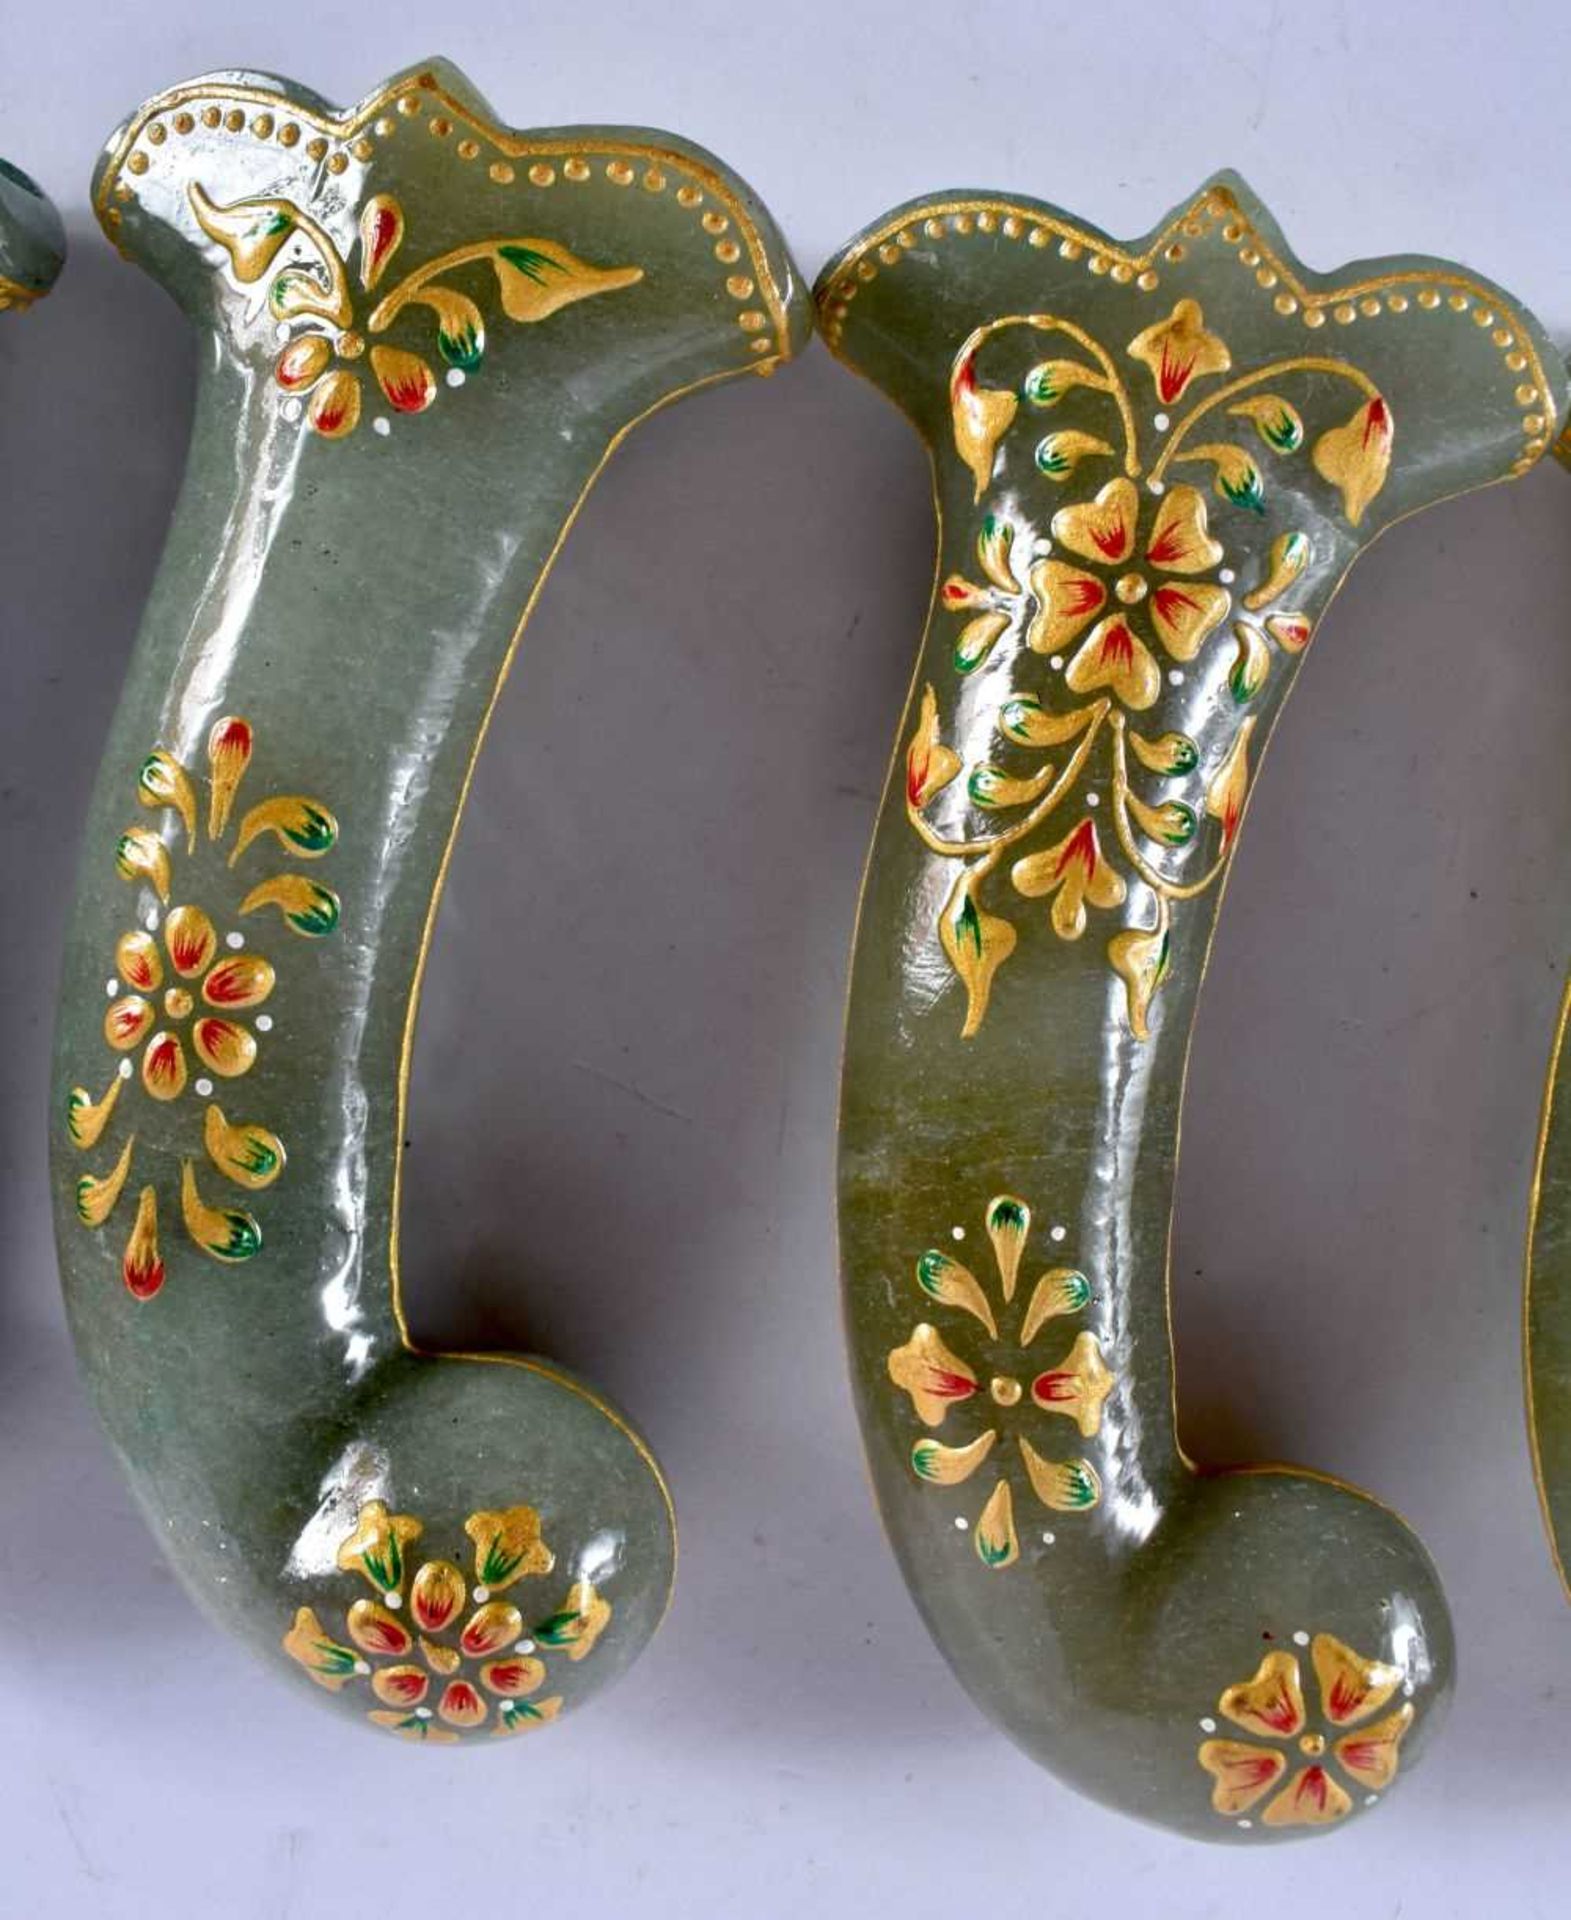 A SET OF FIVE MIDDLE EASTERN QAJAR LACQUER HARDSTONE DAGGER HANDLES overlaid with foliage and vines. - Image 3 of 6